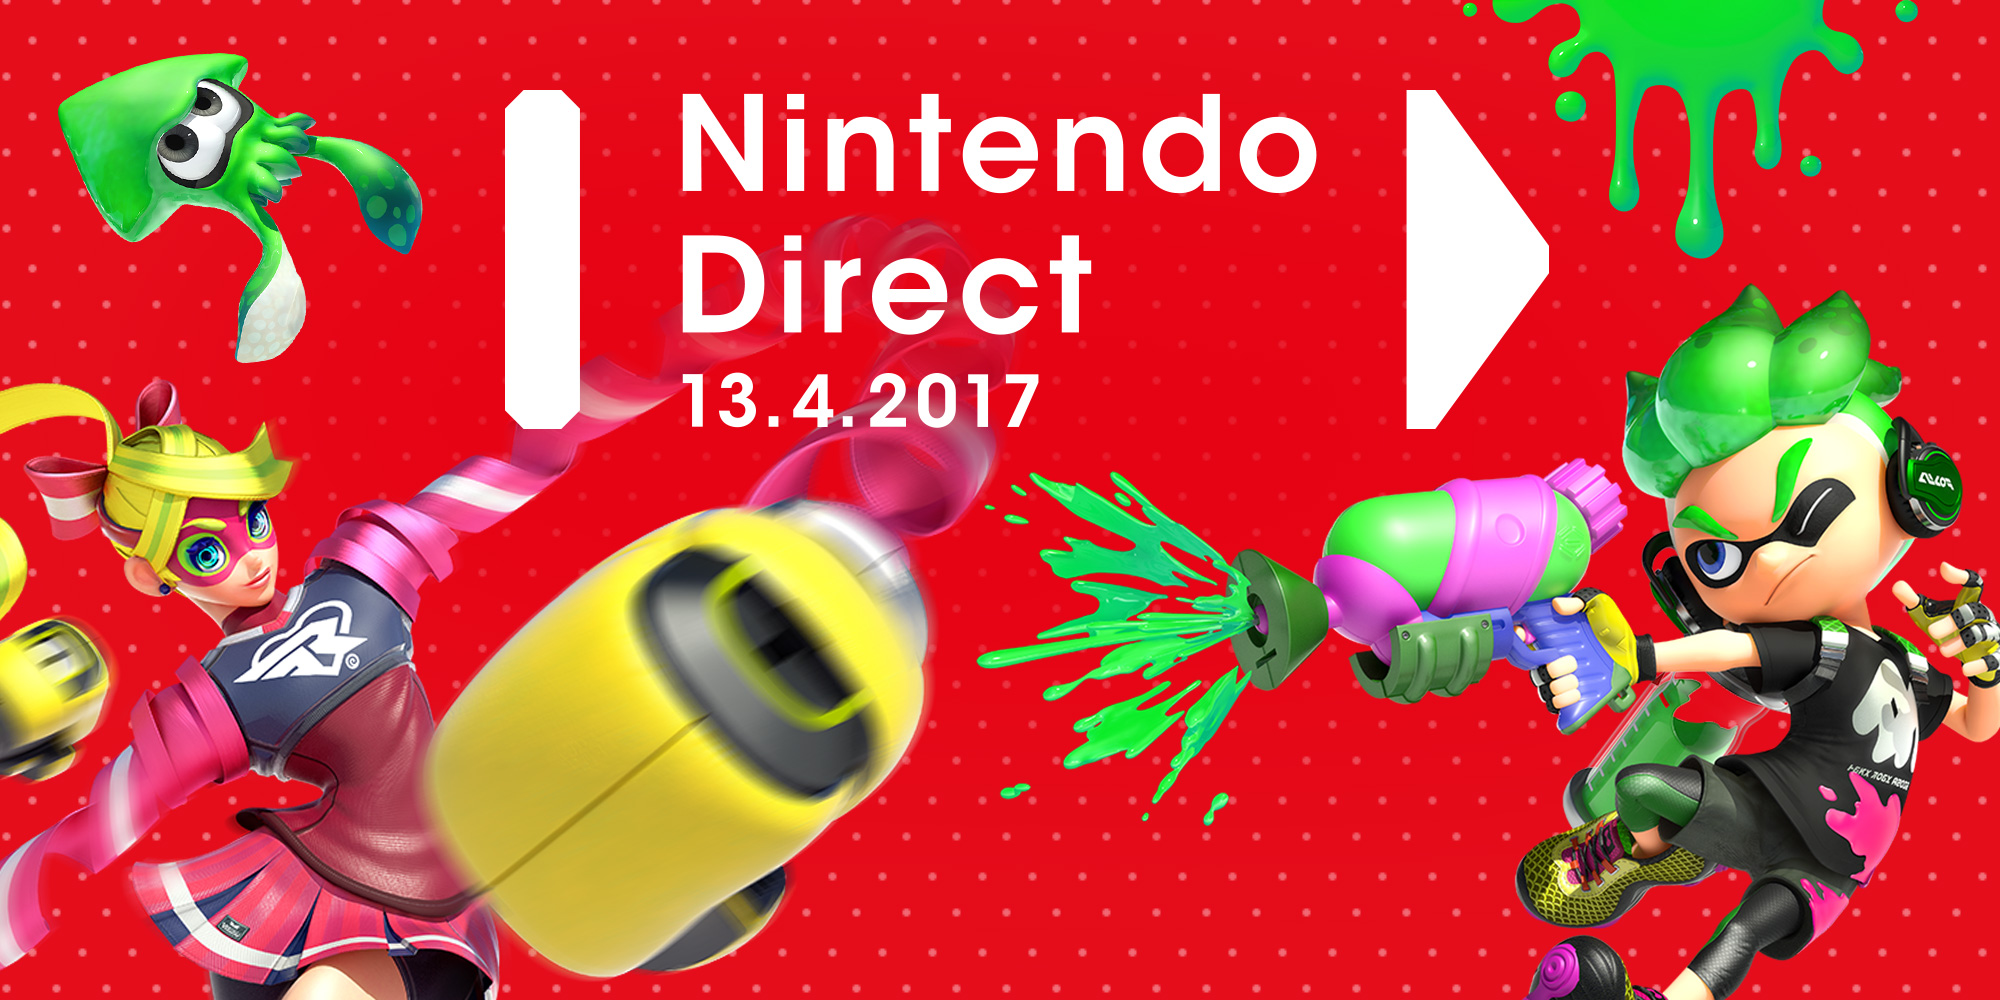 Nintendo Direct Presentation focused on ARMS and Splatoon 2 coming this Thursday at midnight!